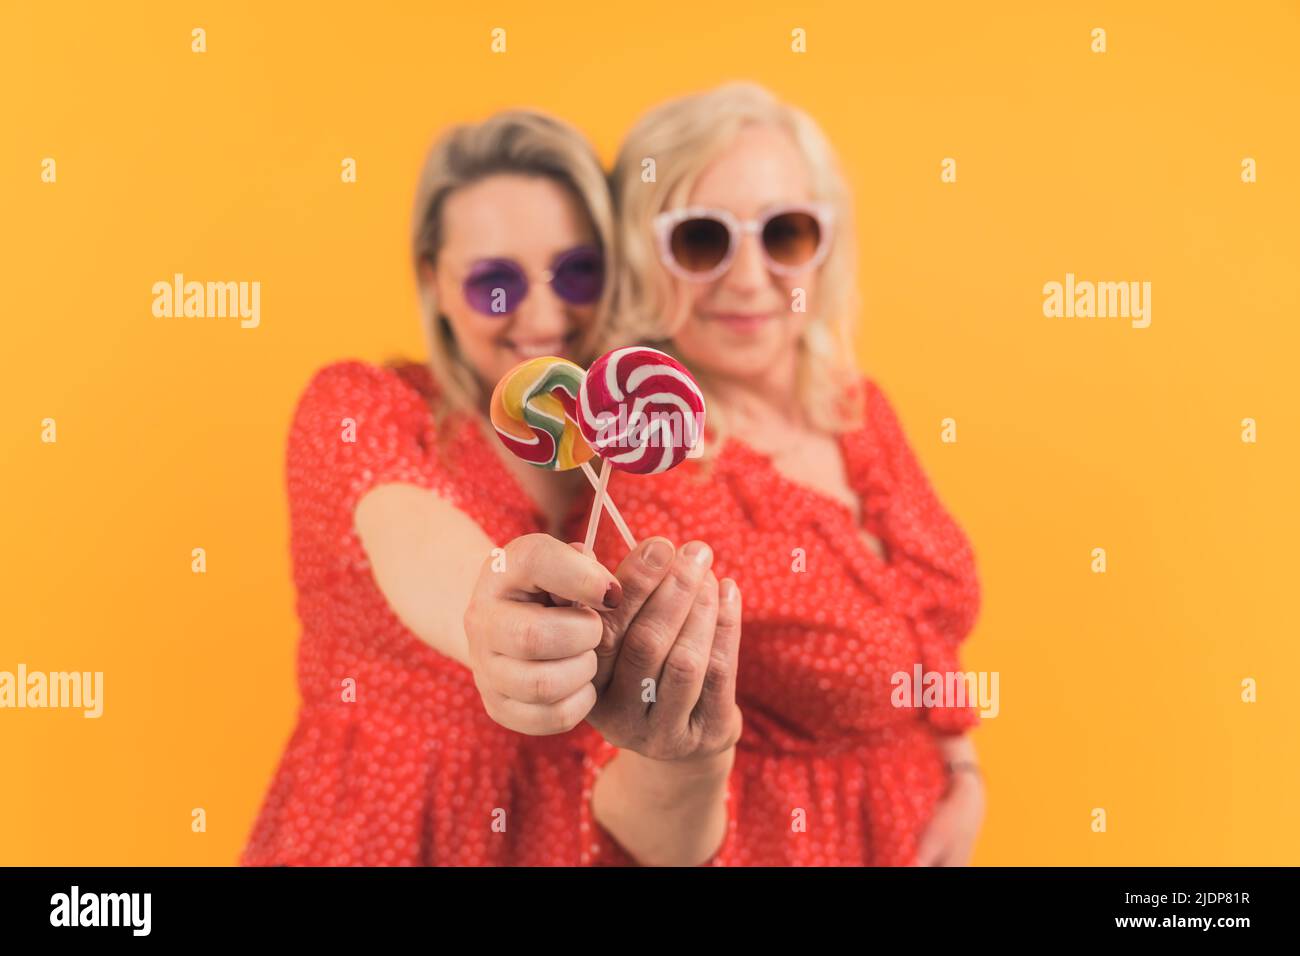 Two blonde excited middle-aged women wearing same red dotted dresses and sunglasses holding colorful lollipops. Yellow background, studio shot. High quality photo Stock Photo